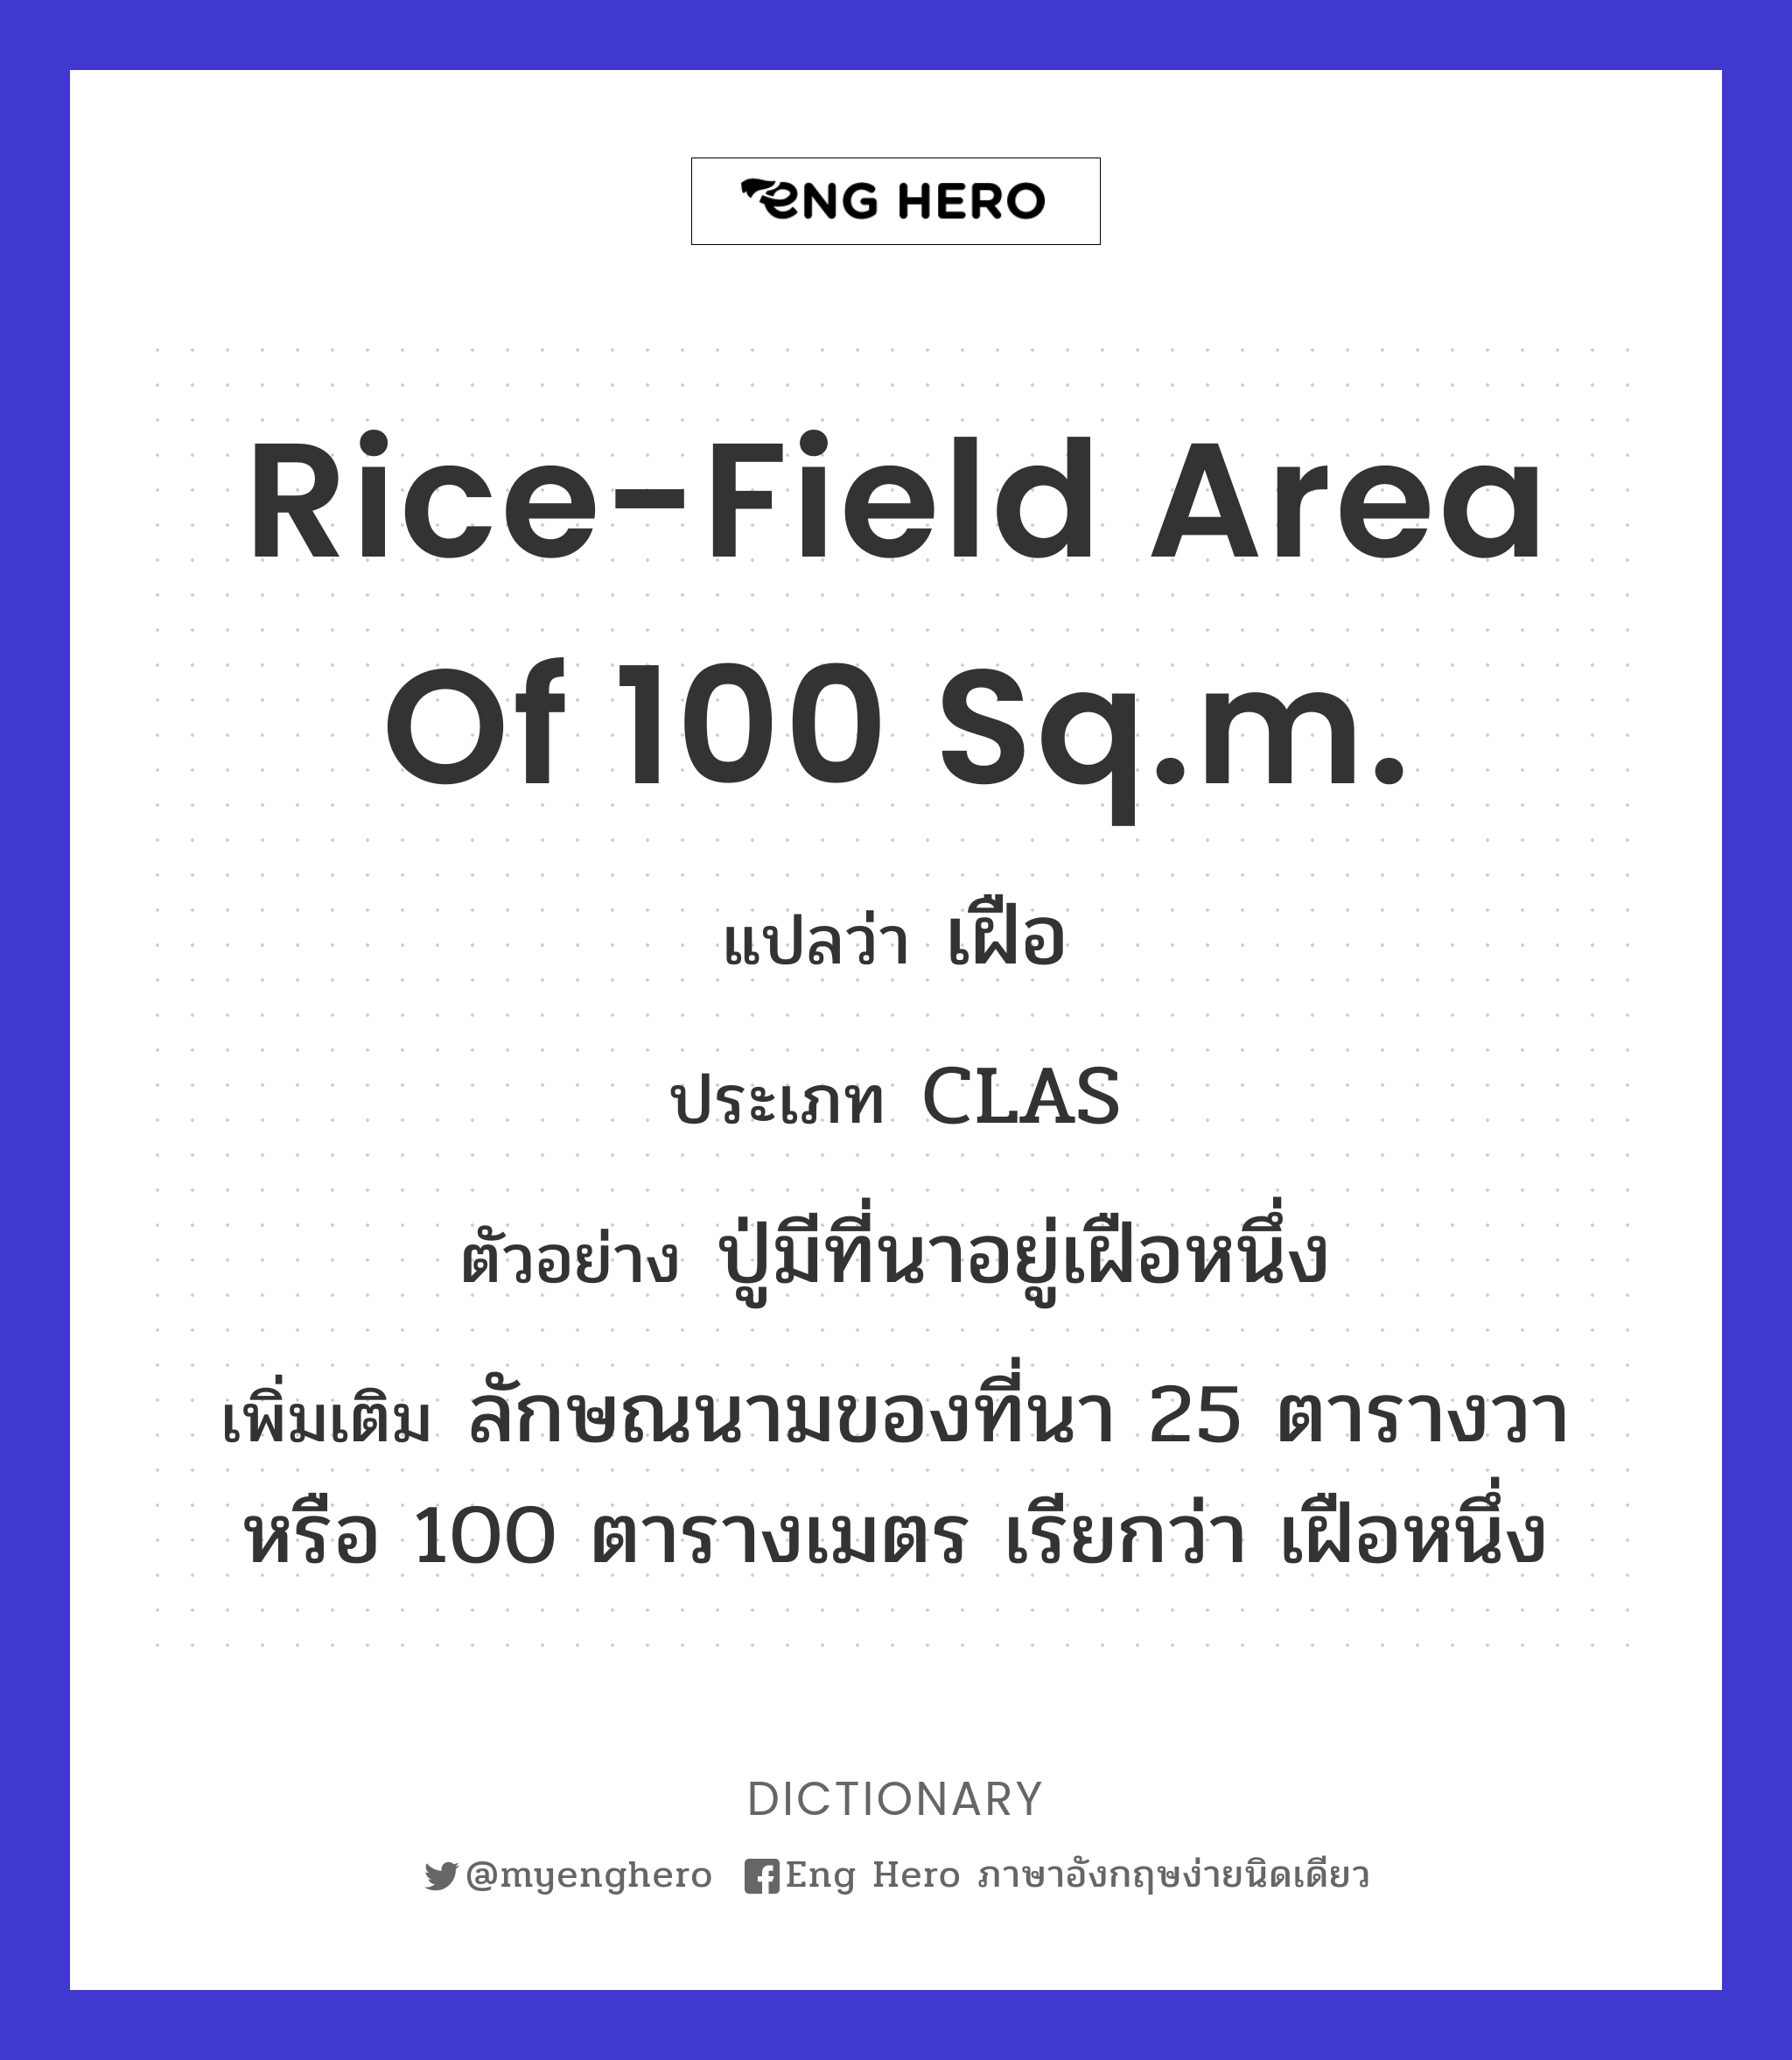 rice-field area of 100 sq.m.